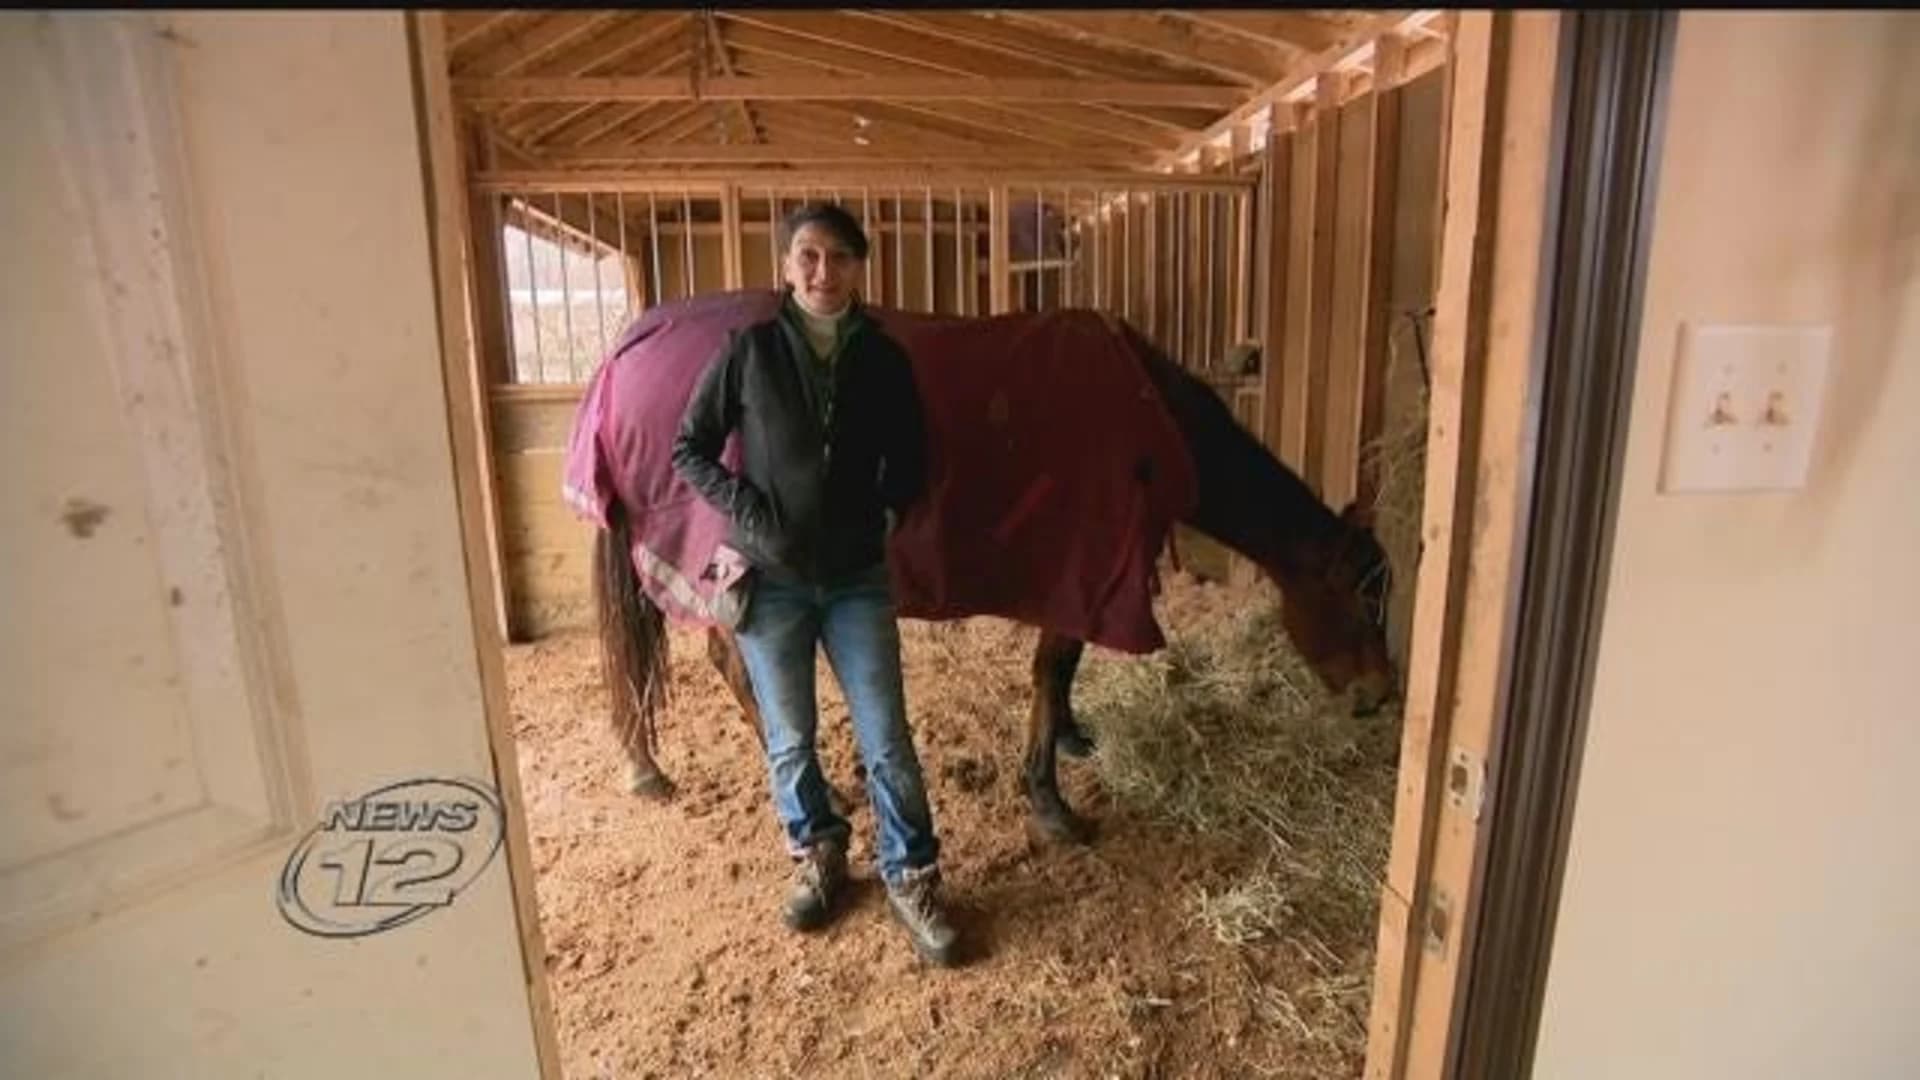 Pony Sitters program gives children hands-on experience with horses